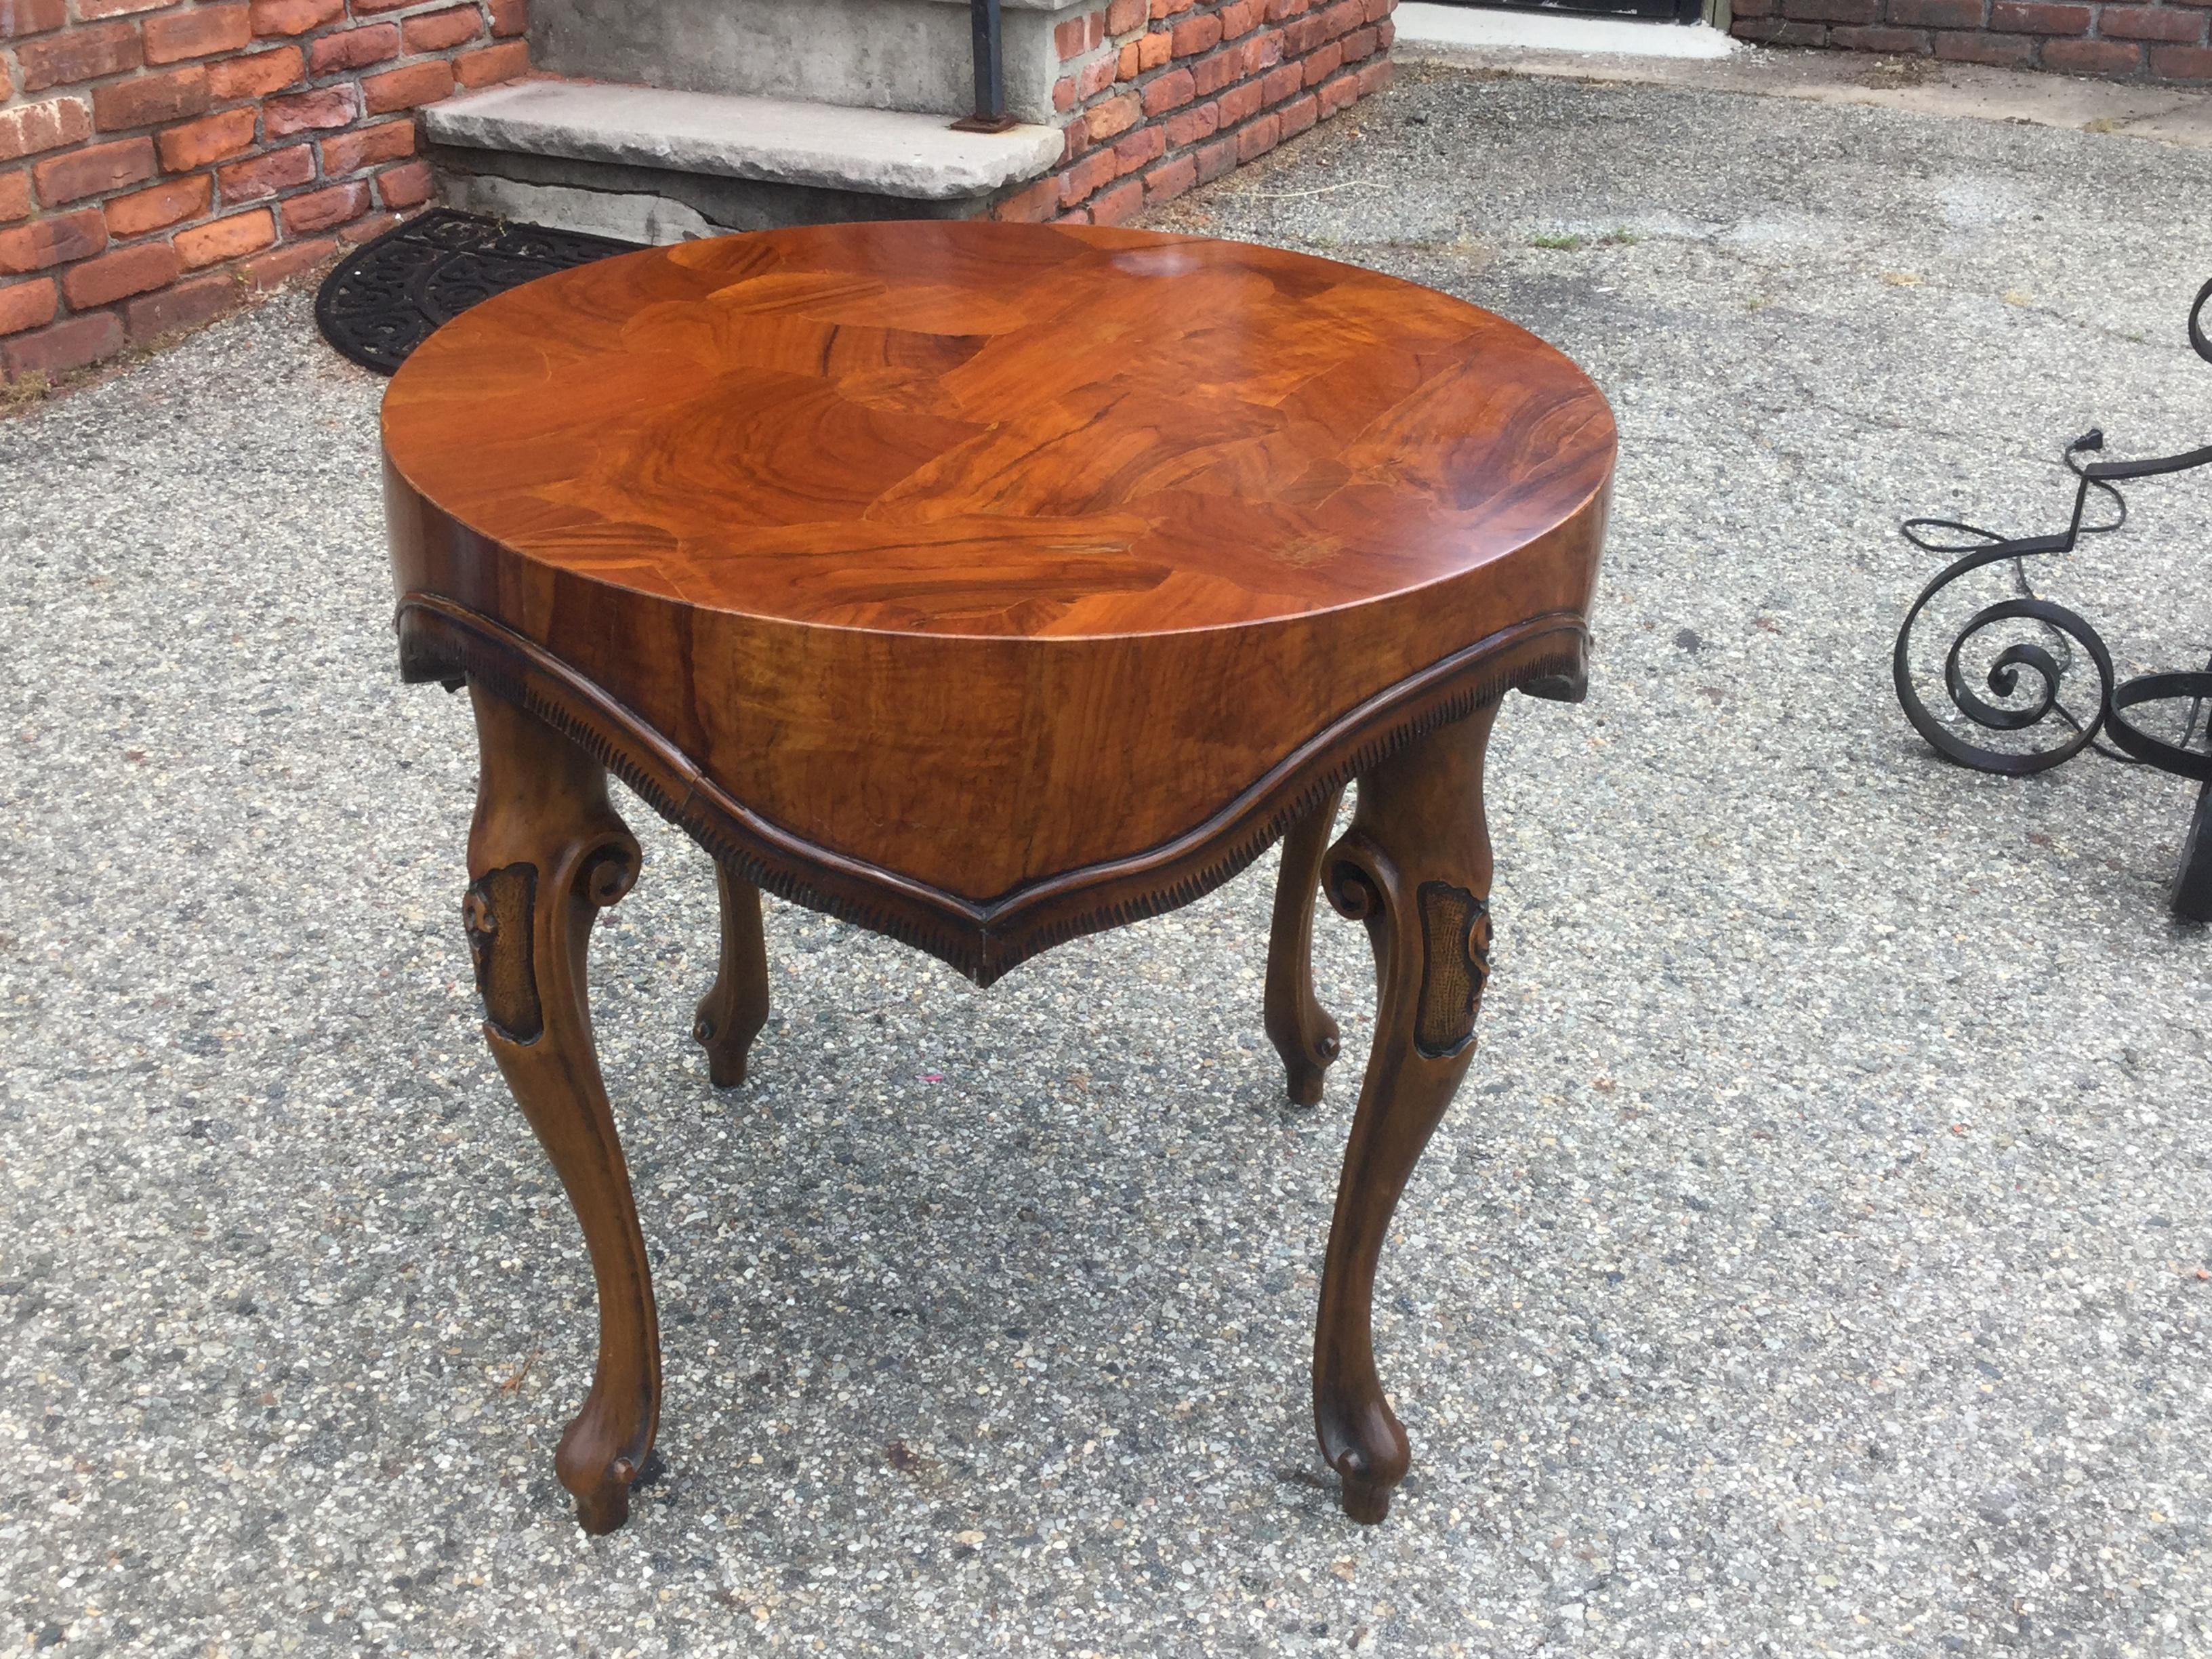 Elegant midcentury Italian end table. Made of walnut, this table features an unusual draped apron. The top is made of multiple veneers for a beautiful mosaic effect. This table can be used as a side table in a bedroom or living room. It can also